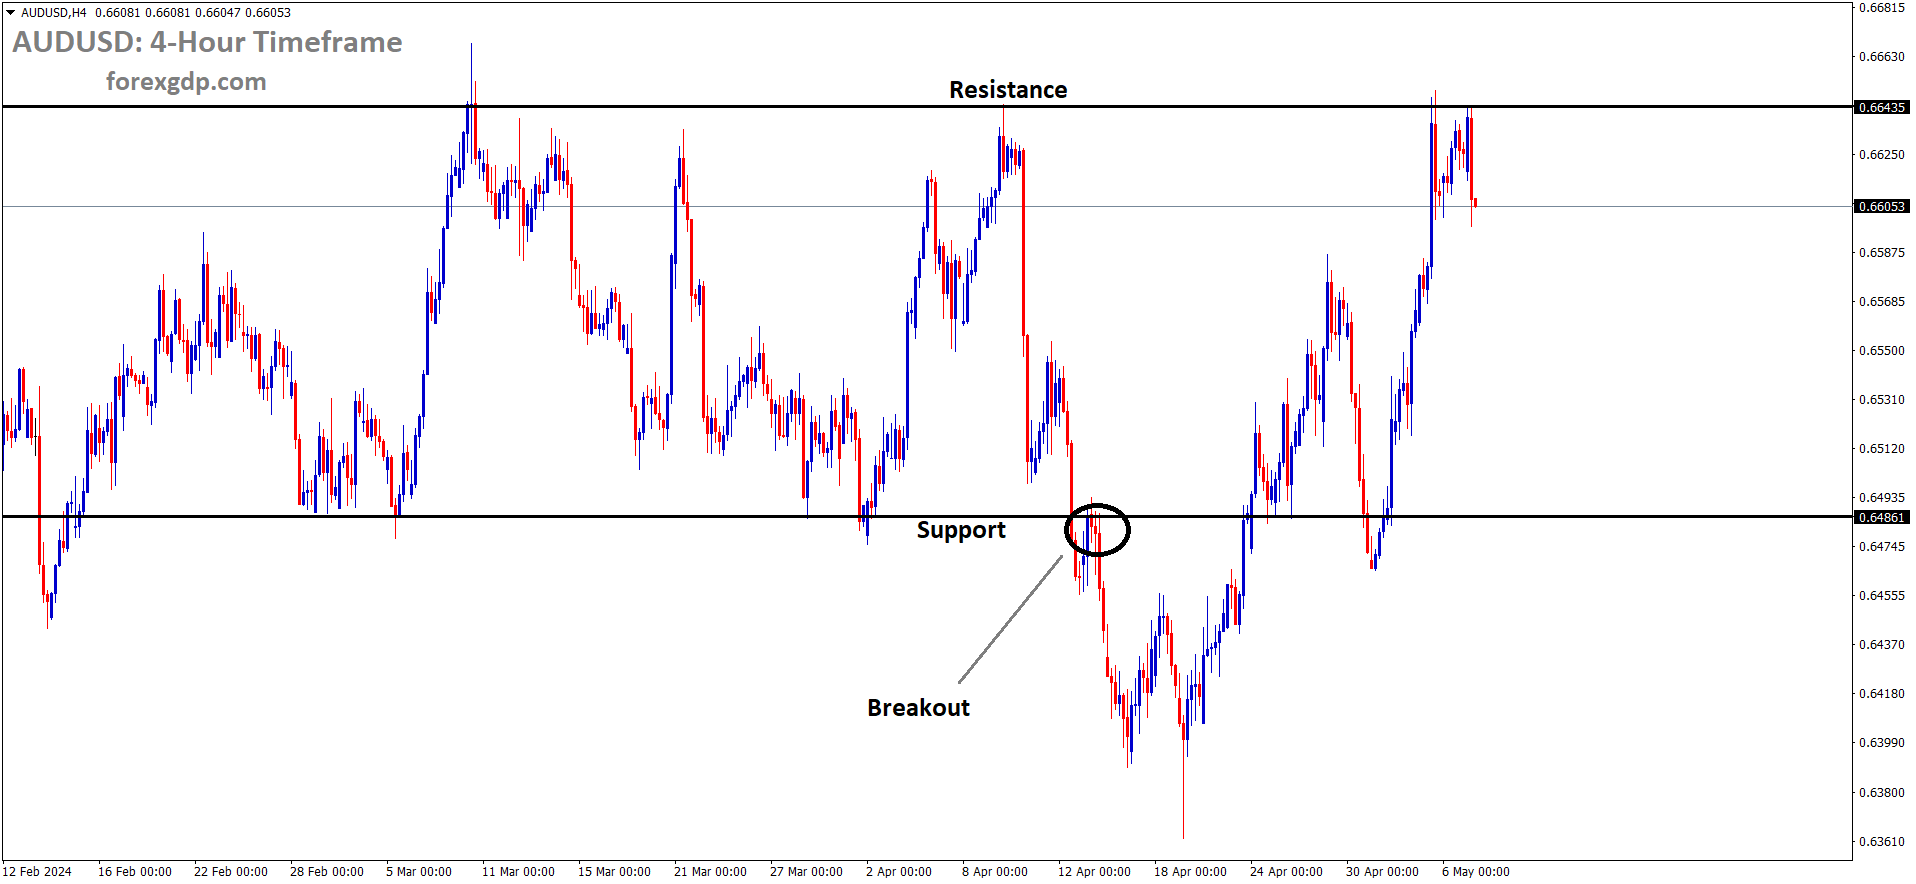 AUDUSD is moving in box pattern and market has fallen from the resistance area of the pattern